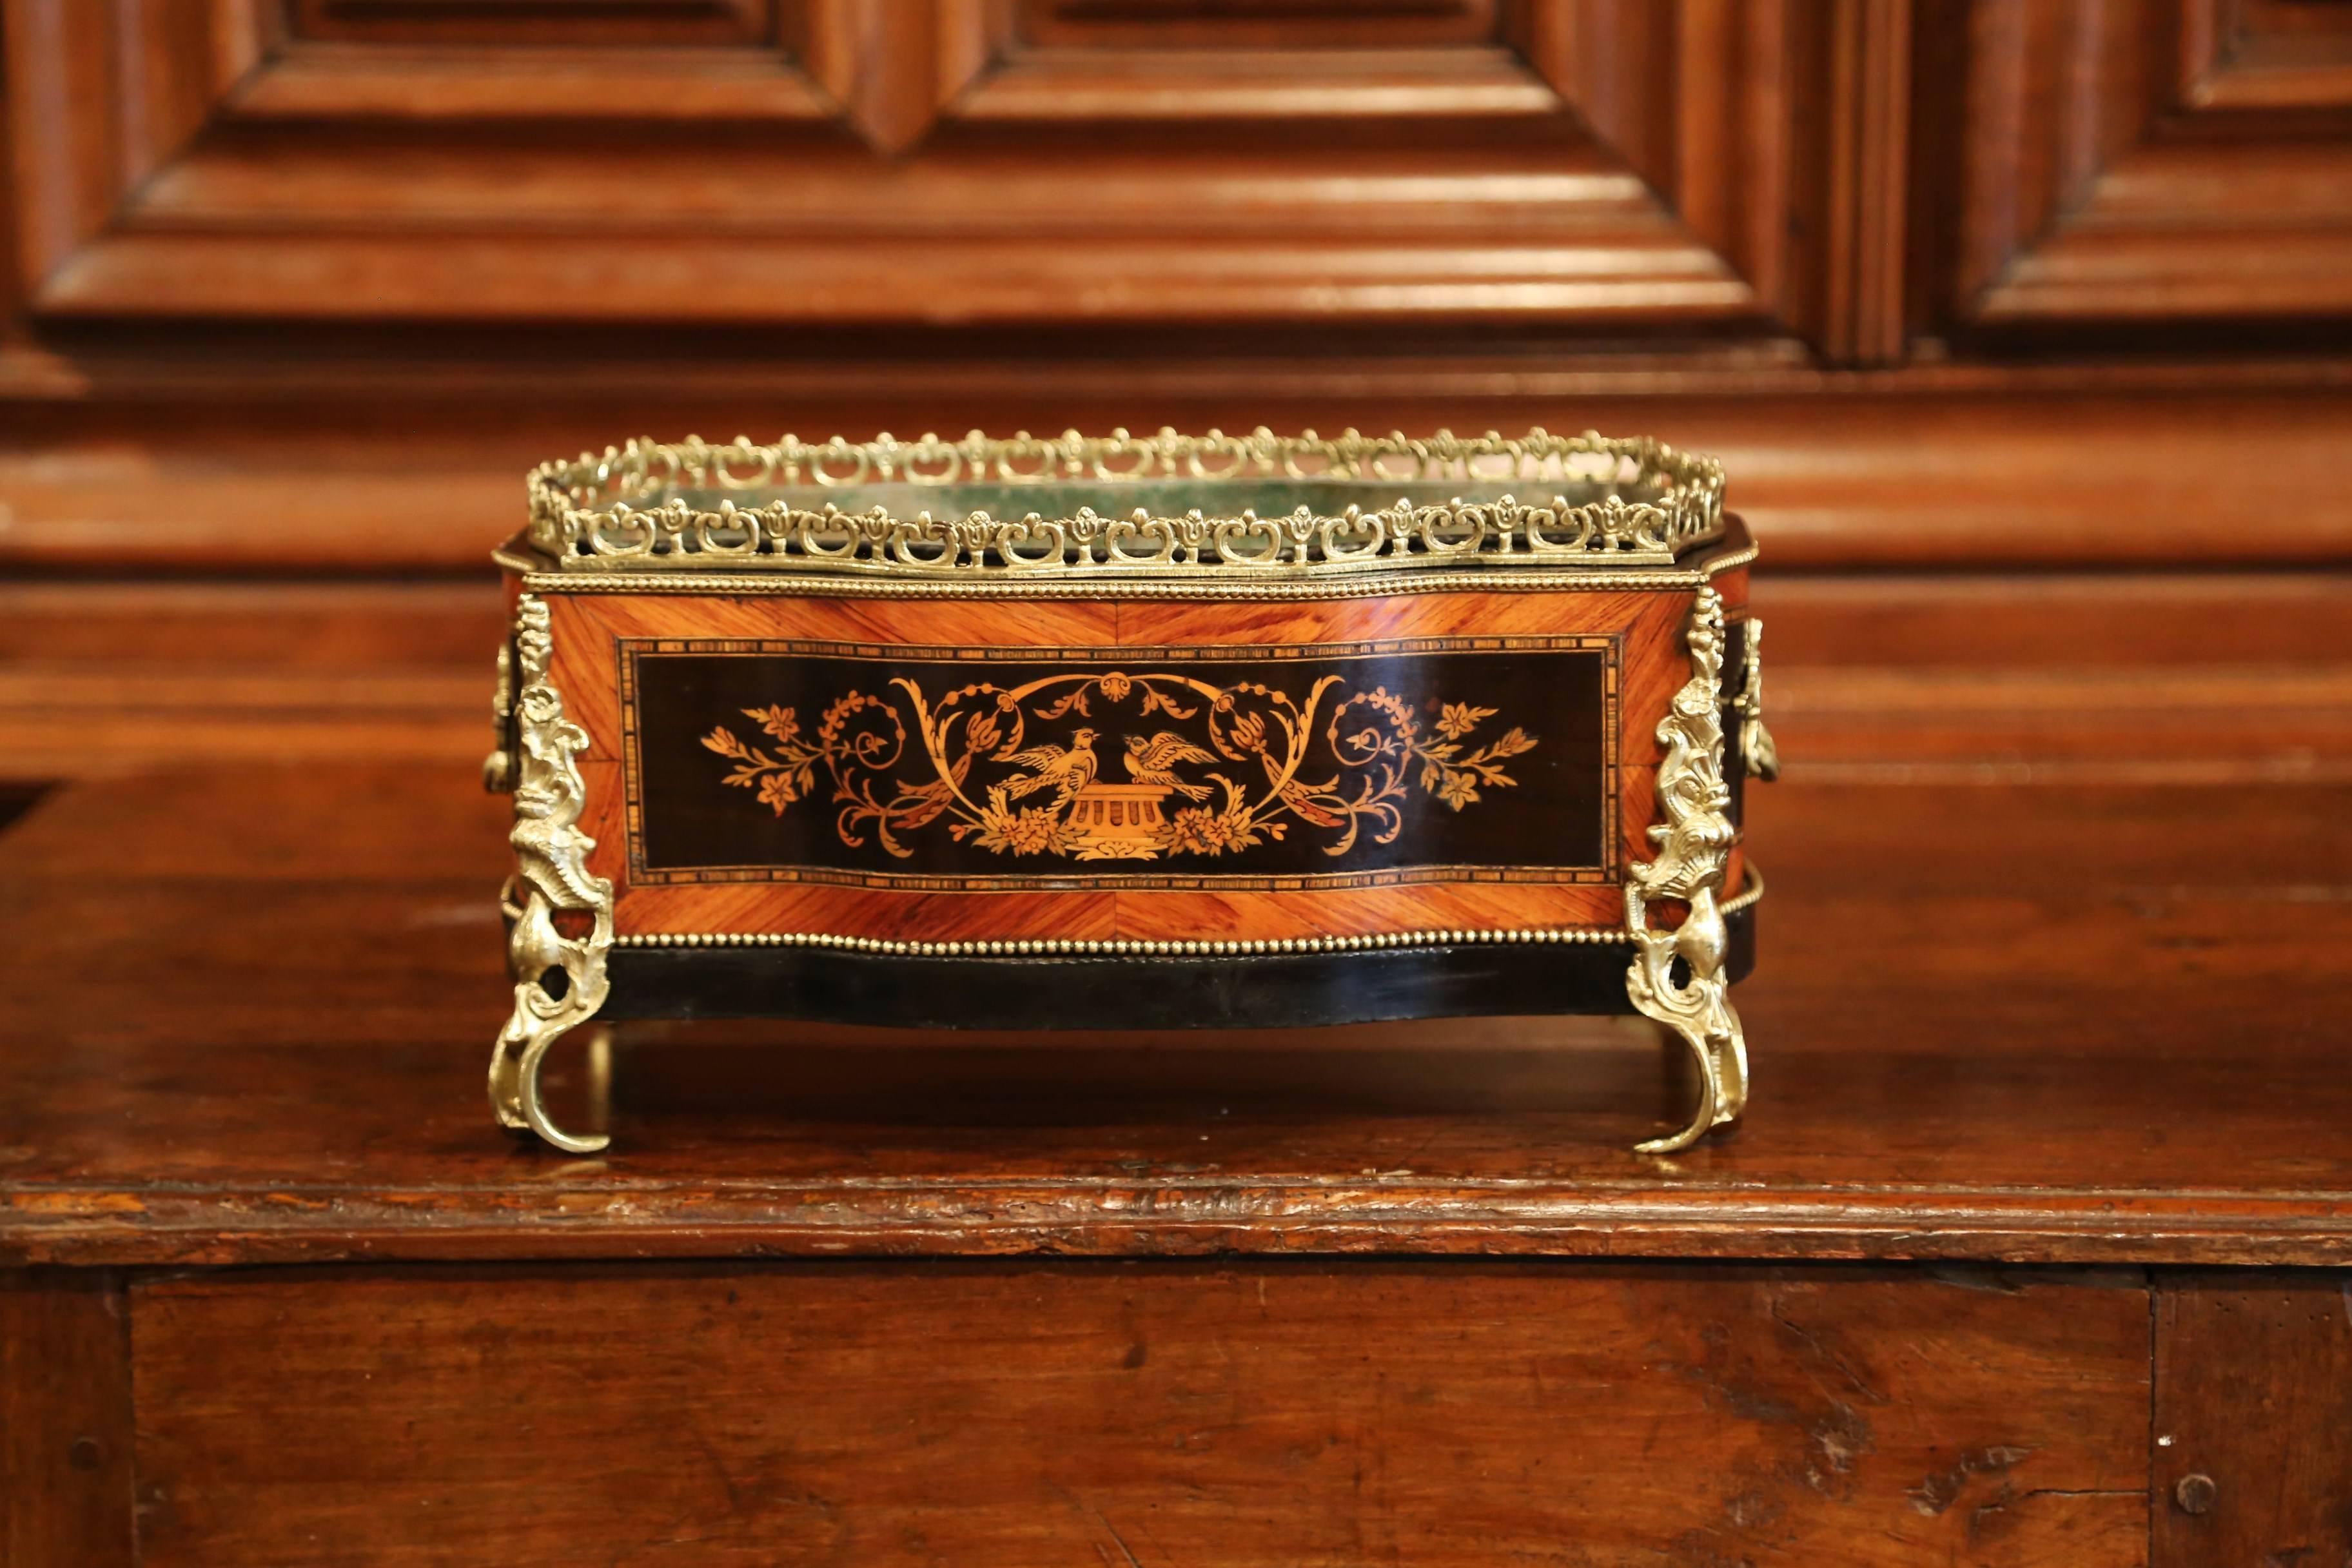 This beautifully crafted, antique fruitwood jardinière was crafted in Paris, France, circa 1870. Rectangular in shape with bow sides, the rosewood and ebony planter features wood marquetry and parquetry decor with very detailed inlay work of a